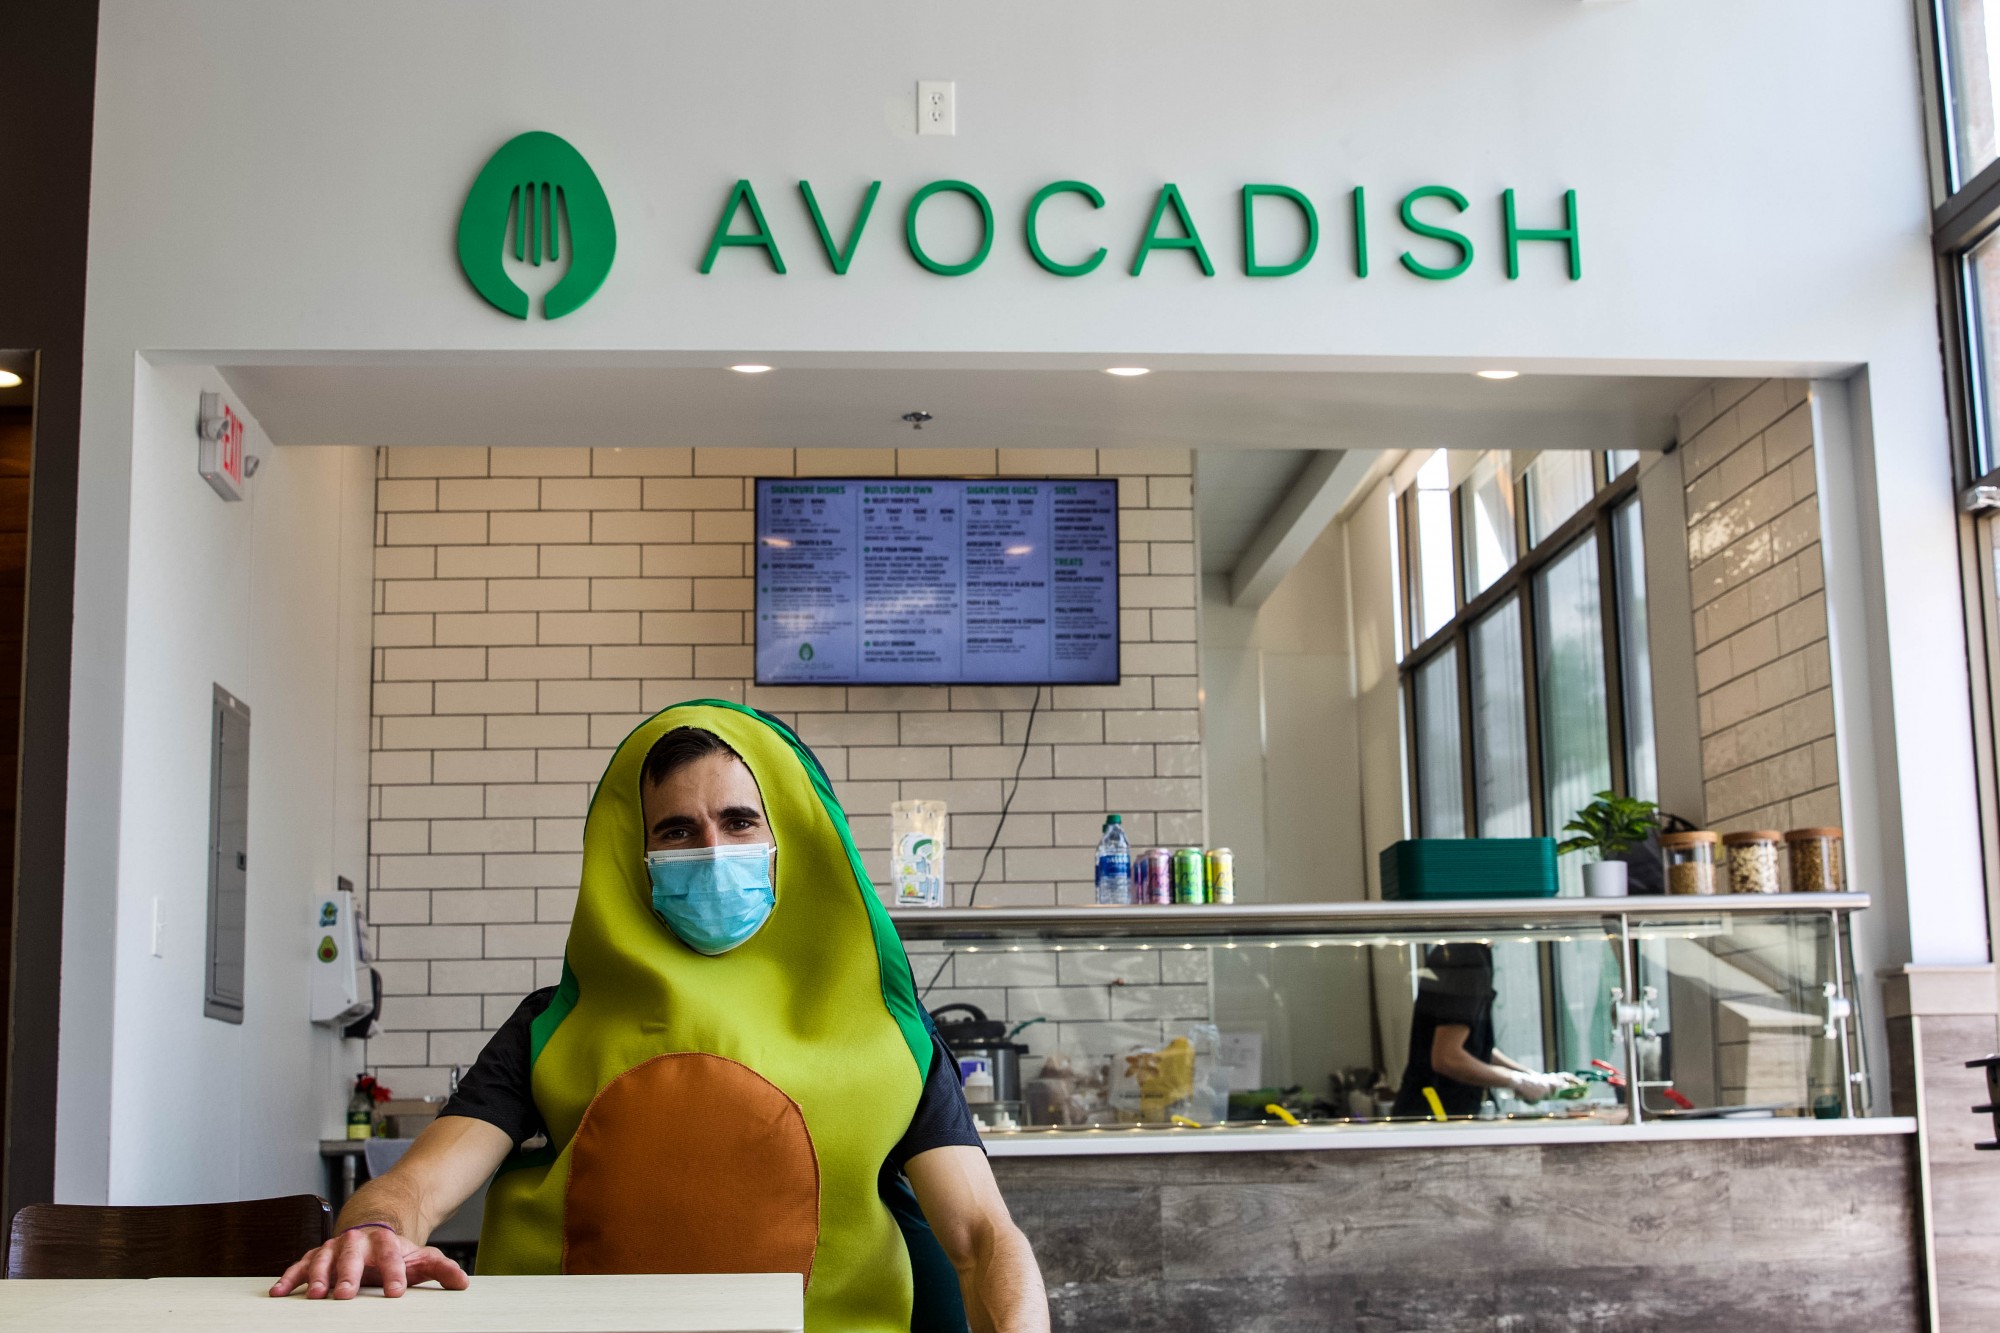 Alex Varouhas, owner of new Dinkytown restaurant, Avocadish, sports an avocado costume while posing for a portrait on Tuesday, June 30. Avocadish opened June 25 and is located in the University Food Hall.